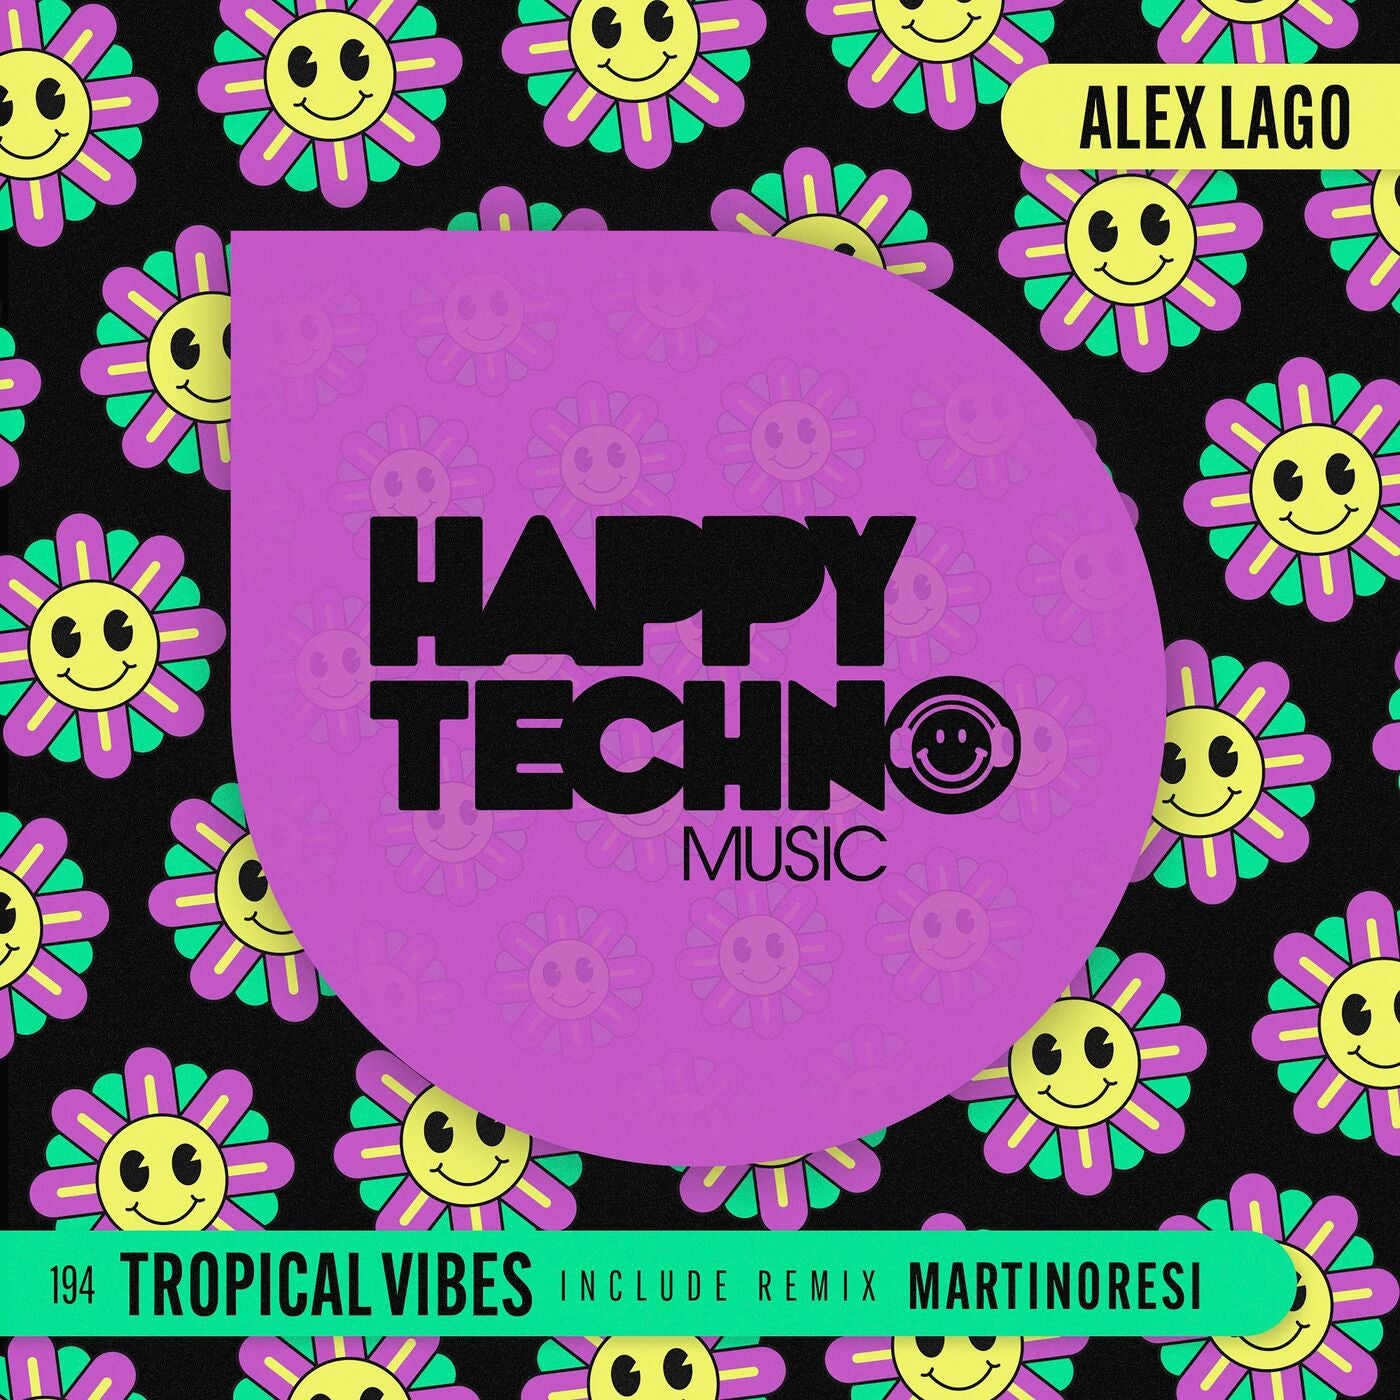 image cover: Alex Lago - Tropical Vibes on Happy Techno Music